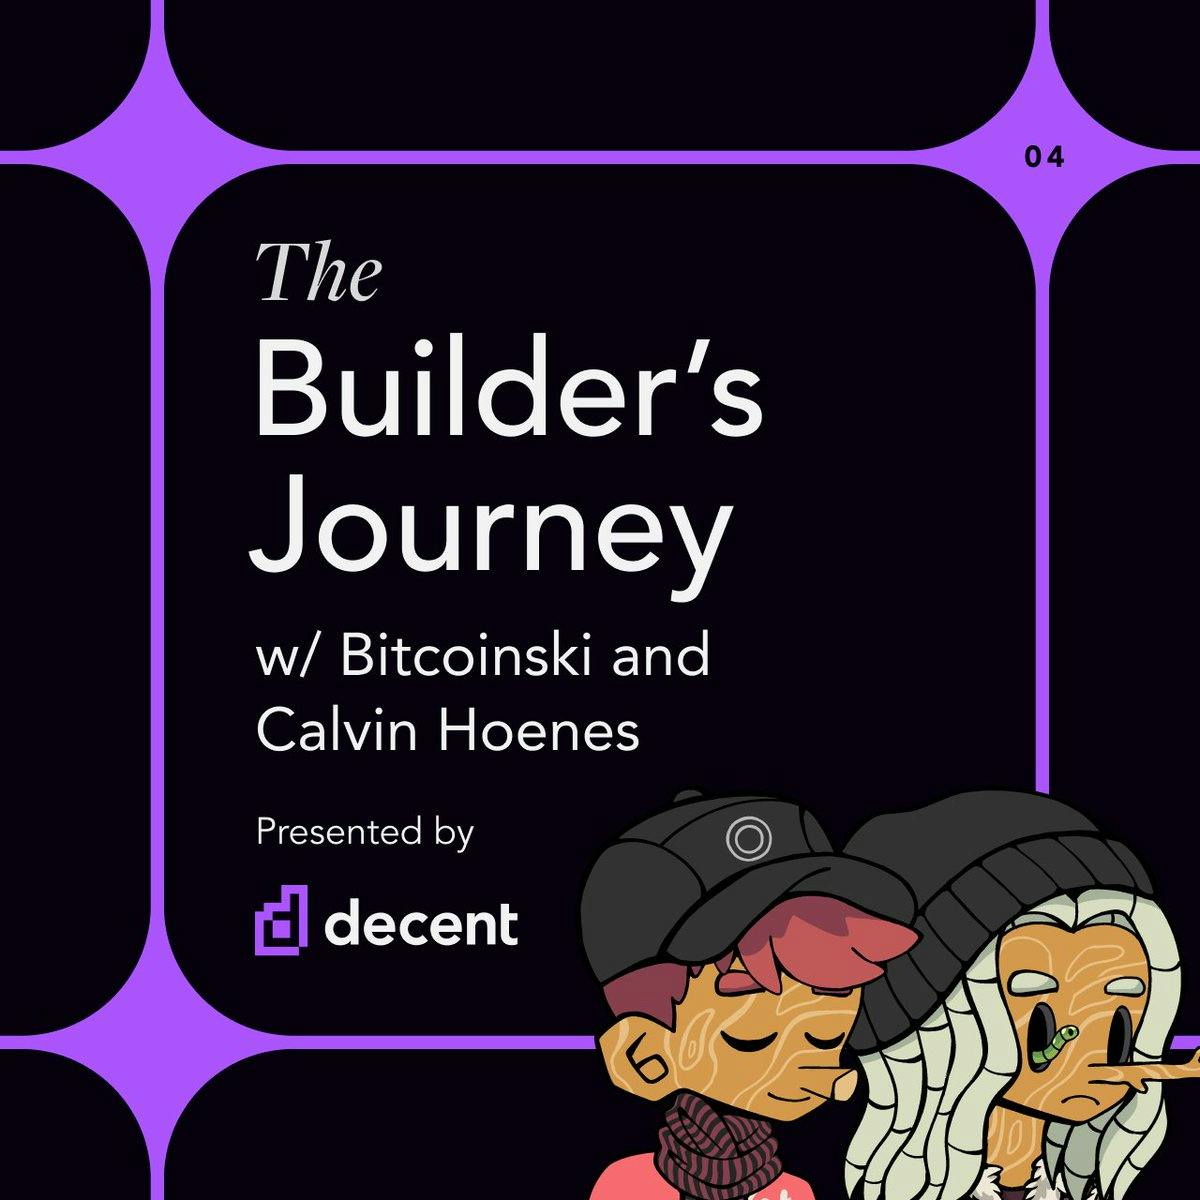 On September 27, 5pm EST, Decent hosts a Builder’s Journey talk with @bitcoinski and @calvinhoenes of @props 🛠️🎙️

We'll discuss managing an #Ethereum #development studio, building #Web3 brands, and the latest trends in #crypto 🚀🔥

Link here 👇🏽
<a style='color: rgb(29,161,242); font-weight:normal; text-decoration: none' href='https://discord.gg/4RW8cF6h?event=1021837838104416336' target='_blank'>discord.gg/4RW8cF6h?event…</a> 